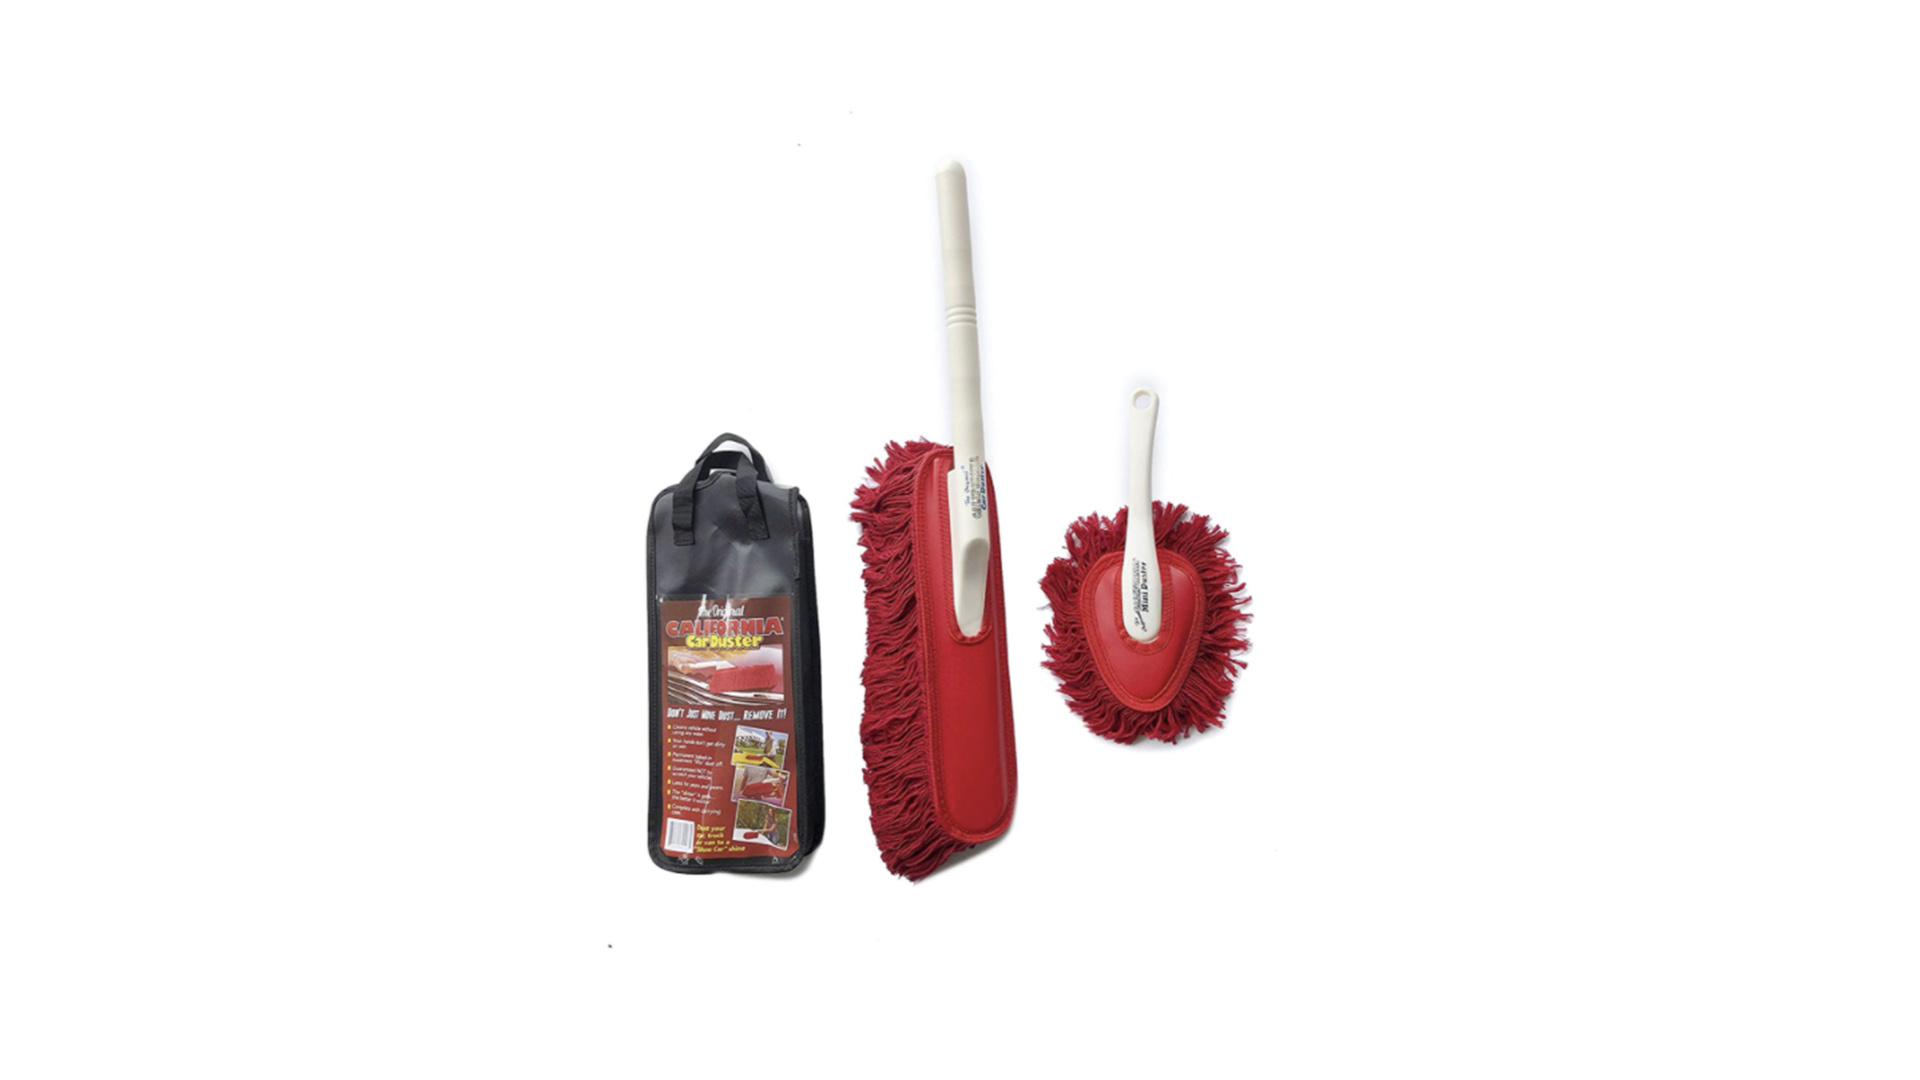 Ultimate Car Duster - The Best Microfiber Multipurpose Duster - Exterior or Interior Use - Lint Free